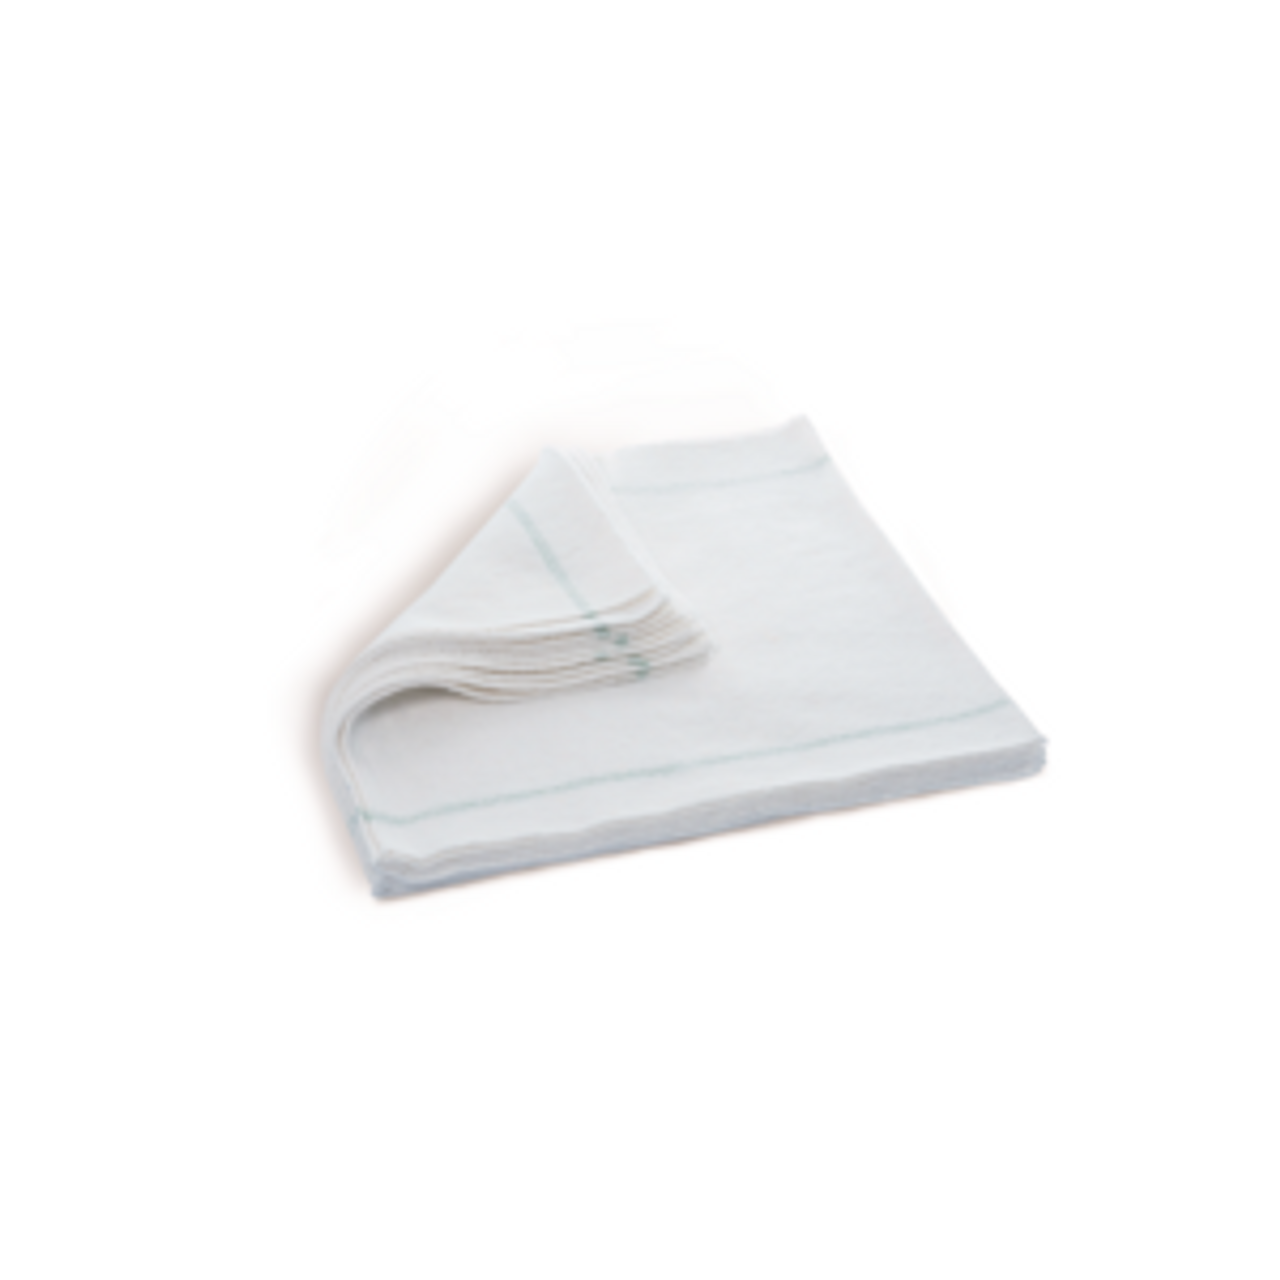 Loba Wiping Cloth Pack of 10